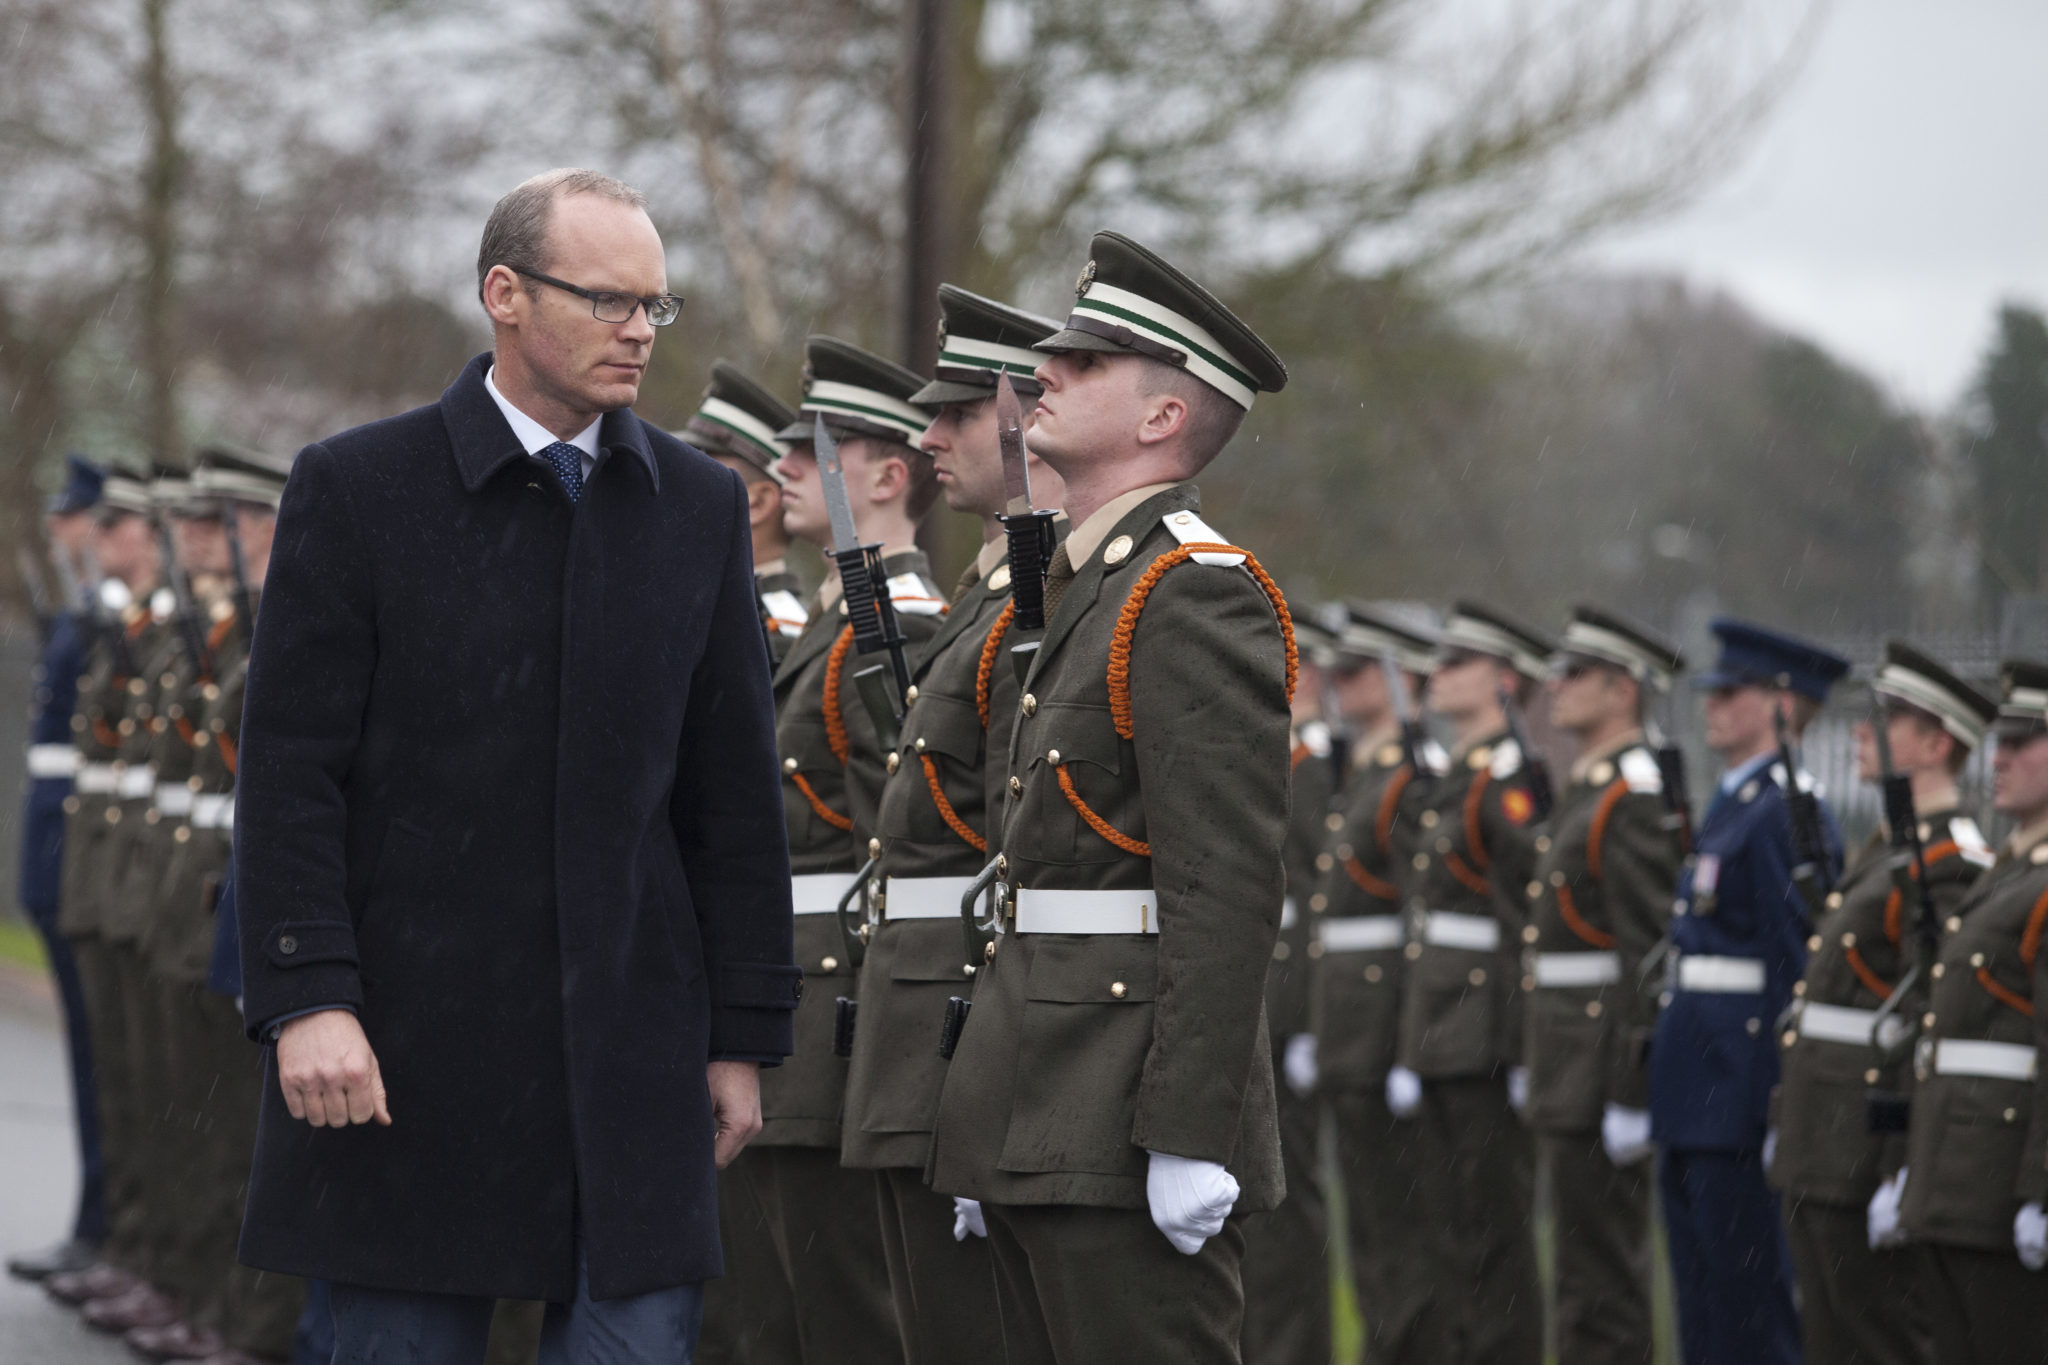 File photo of Simon Coveney at a commissioning of Irish and Maltese Defence Force Officers, 28-01-2015. Image: RollingNews